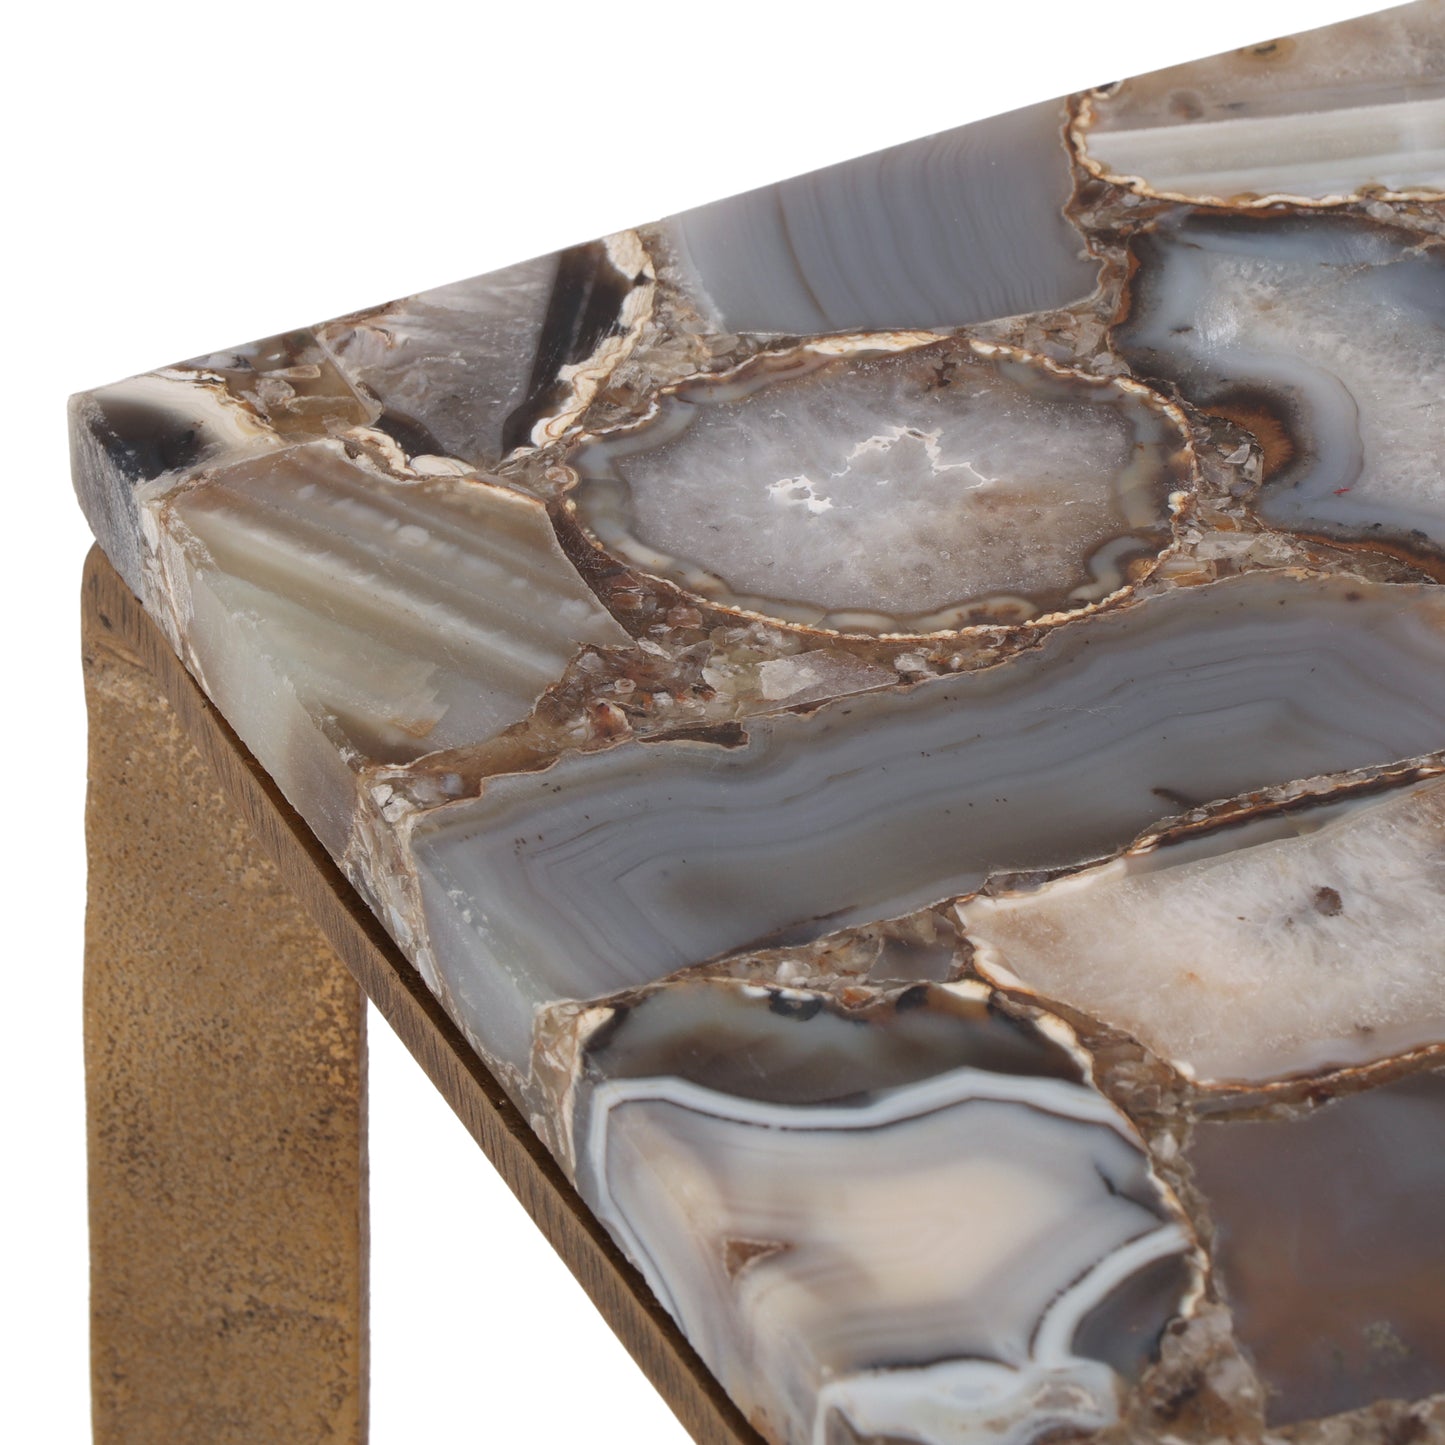 Bridger Boho Glam Handcrafted Aluminum Side Table with Agate Marble Top, Natural and Raw Brass